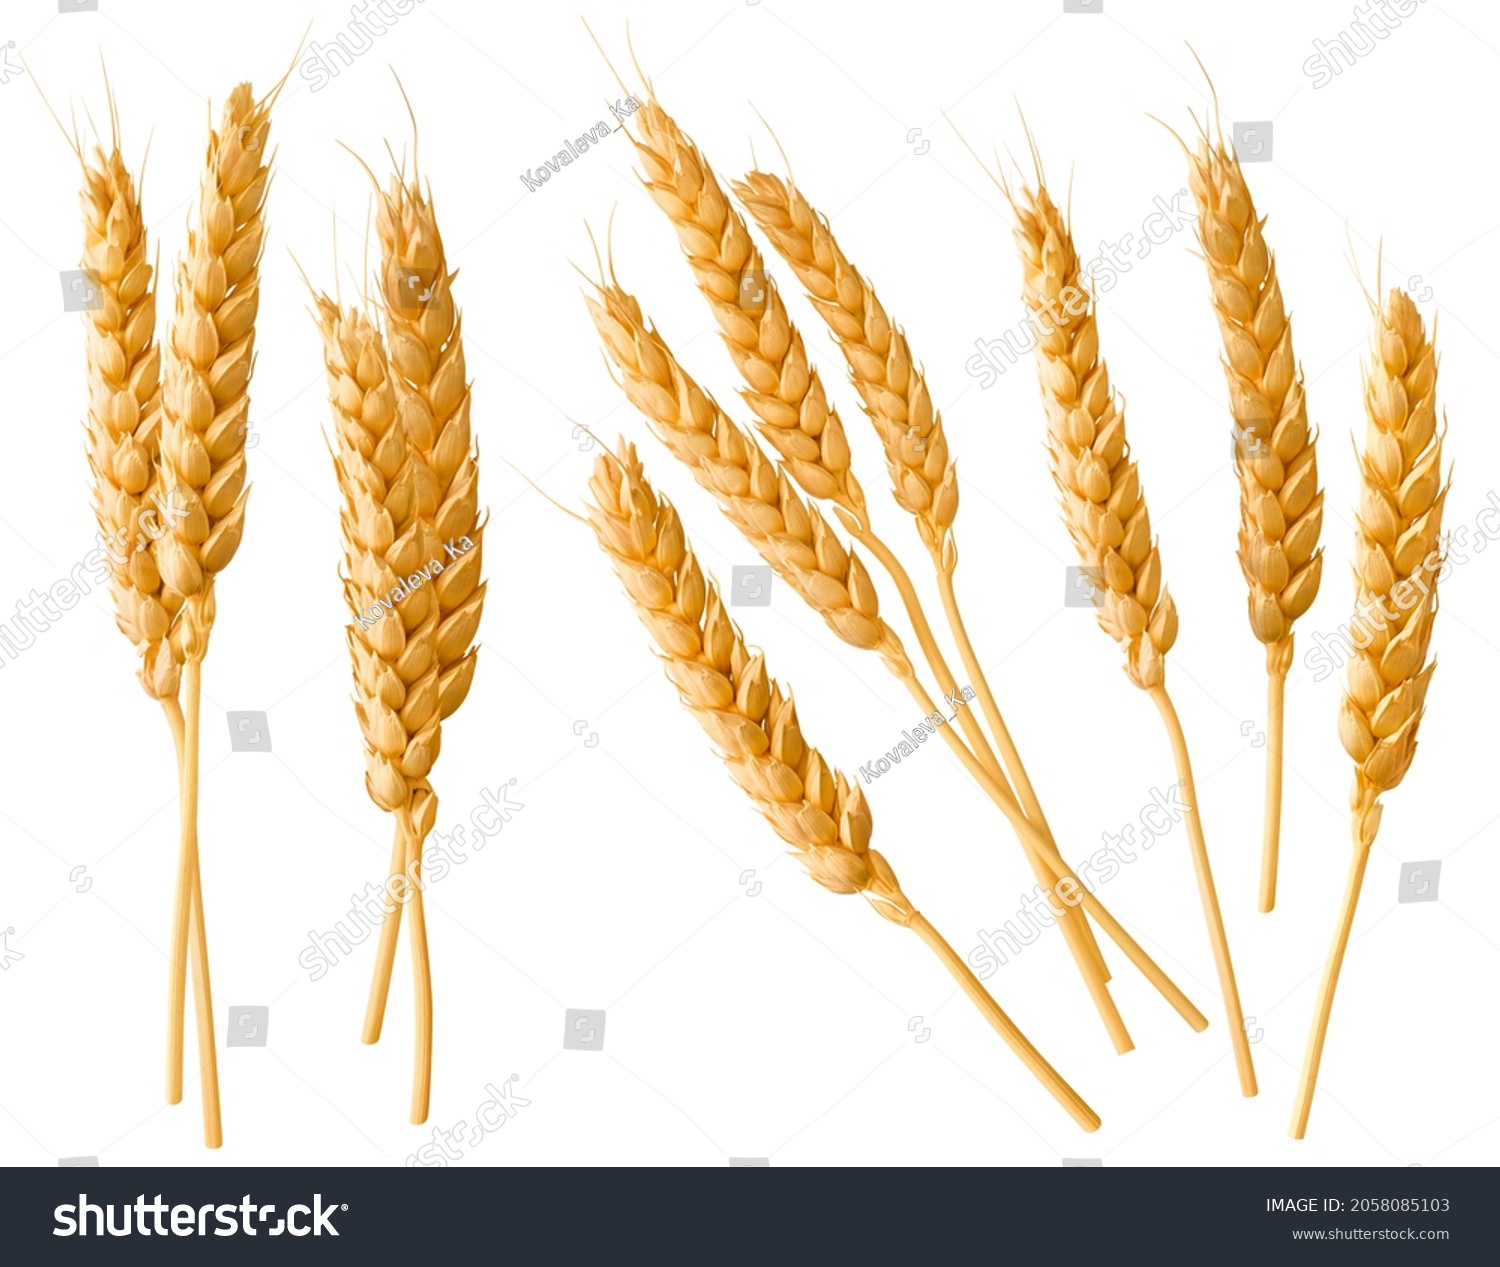 Wheat ears or heads set isolated on white background. Package design element with clipping path #2058085103